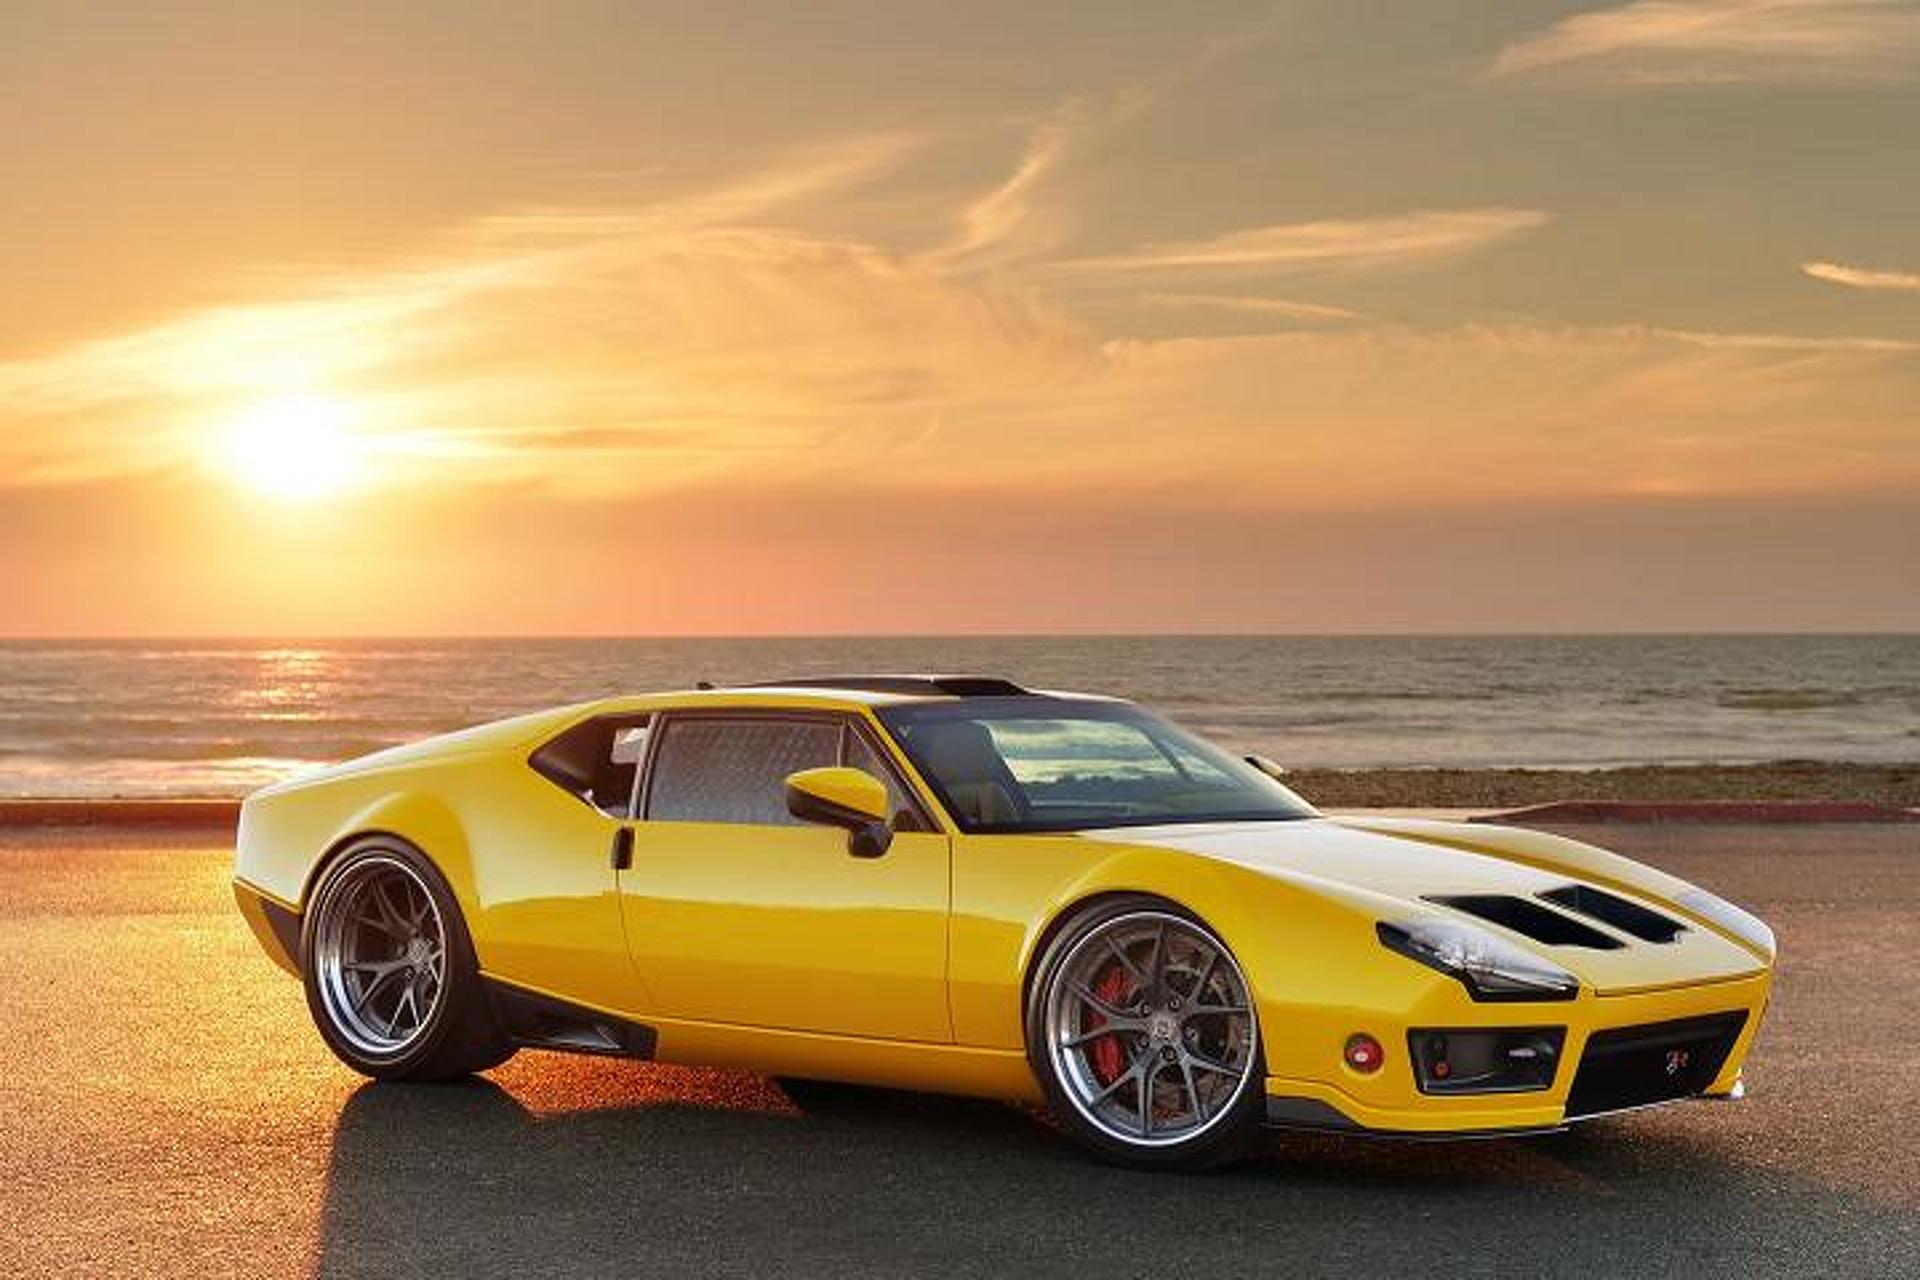 A yellow, custom, DeTomaso Pantera is parked before an ocean view.